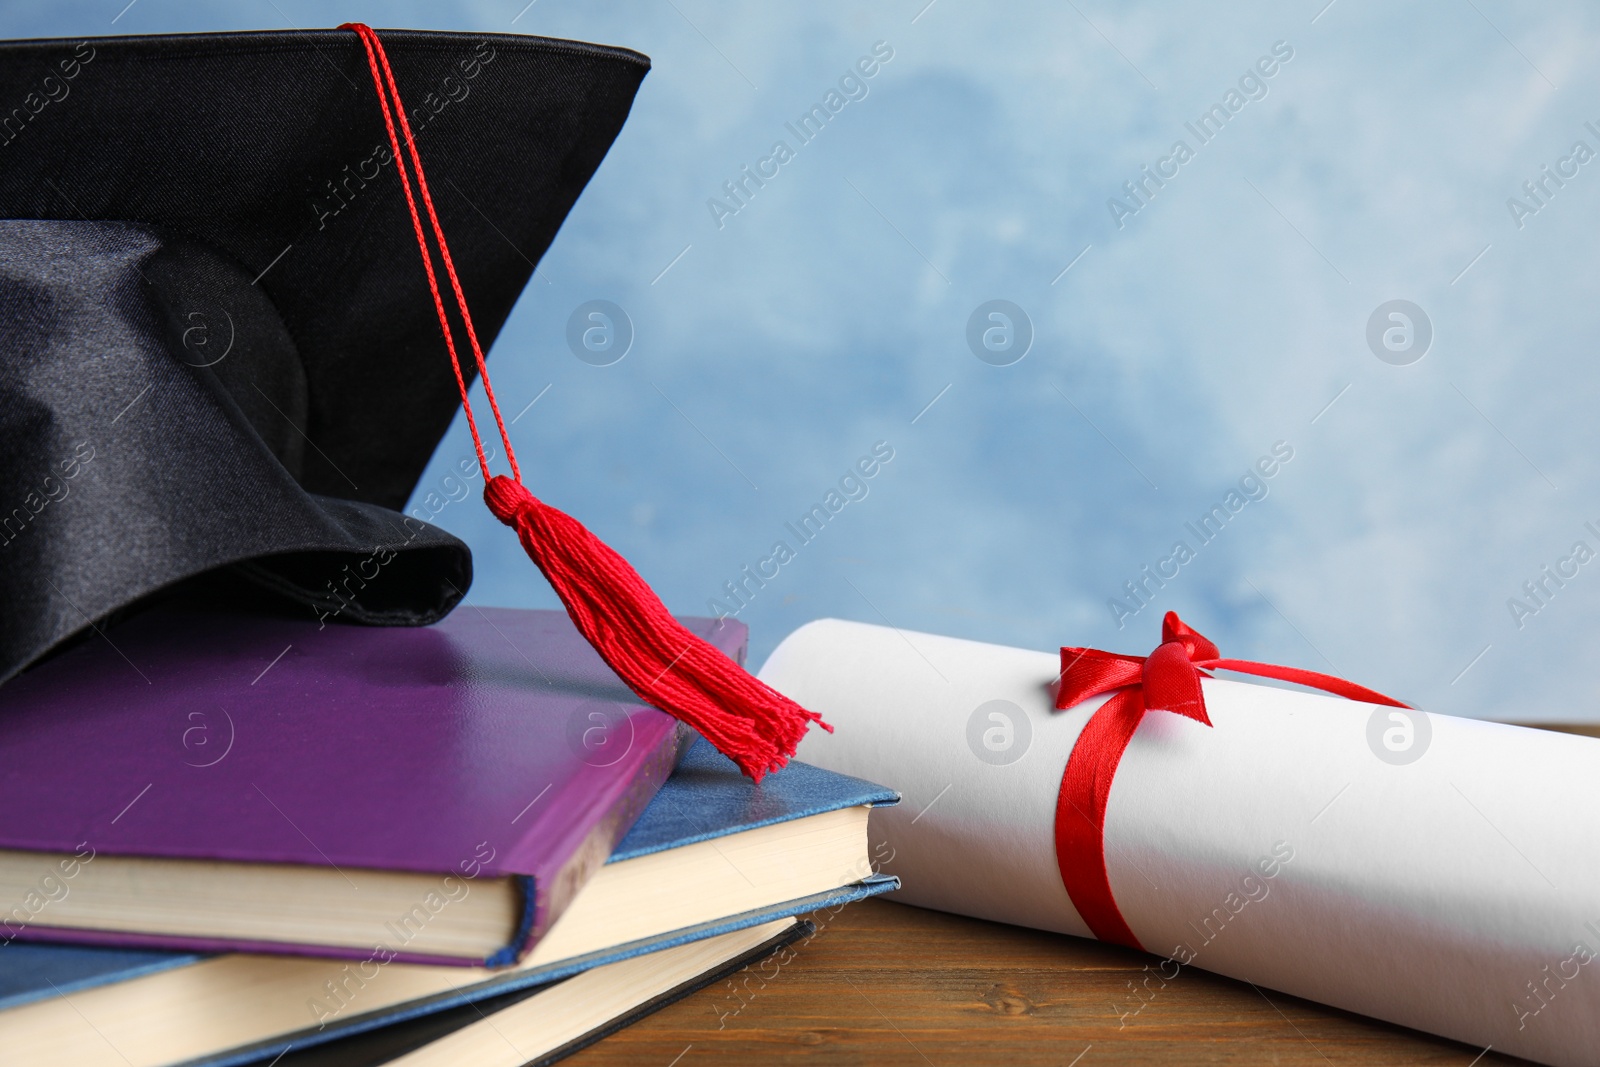 Photo of Graduation hat, books and student's diploma on wooden table against light blue background